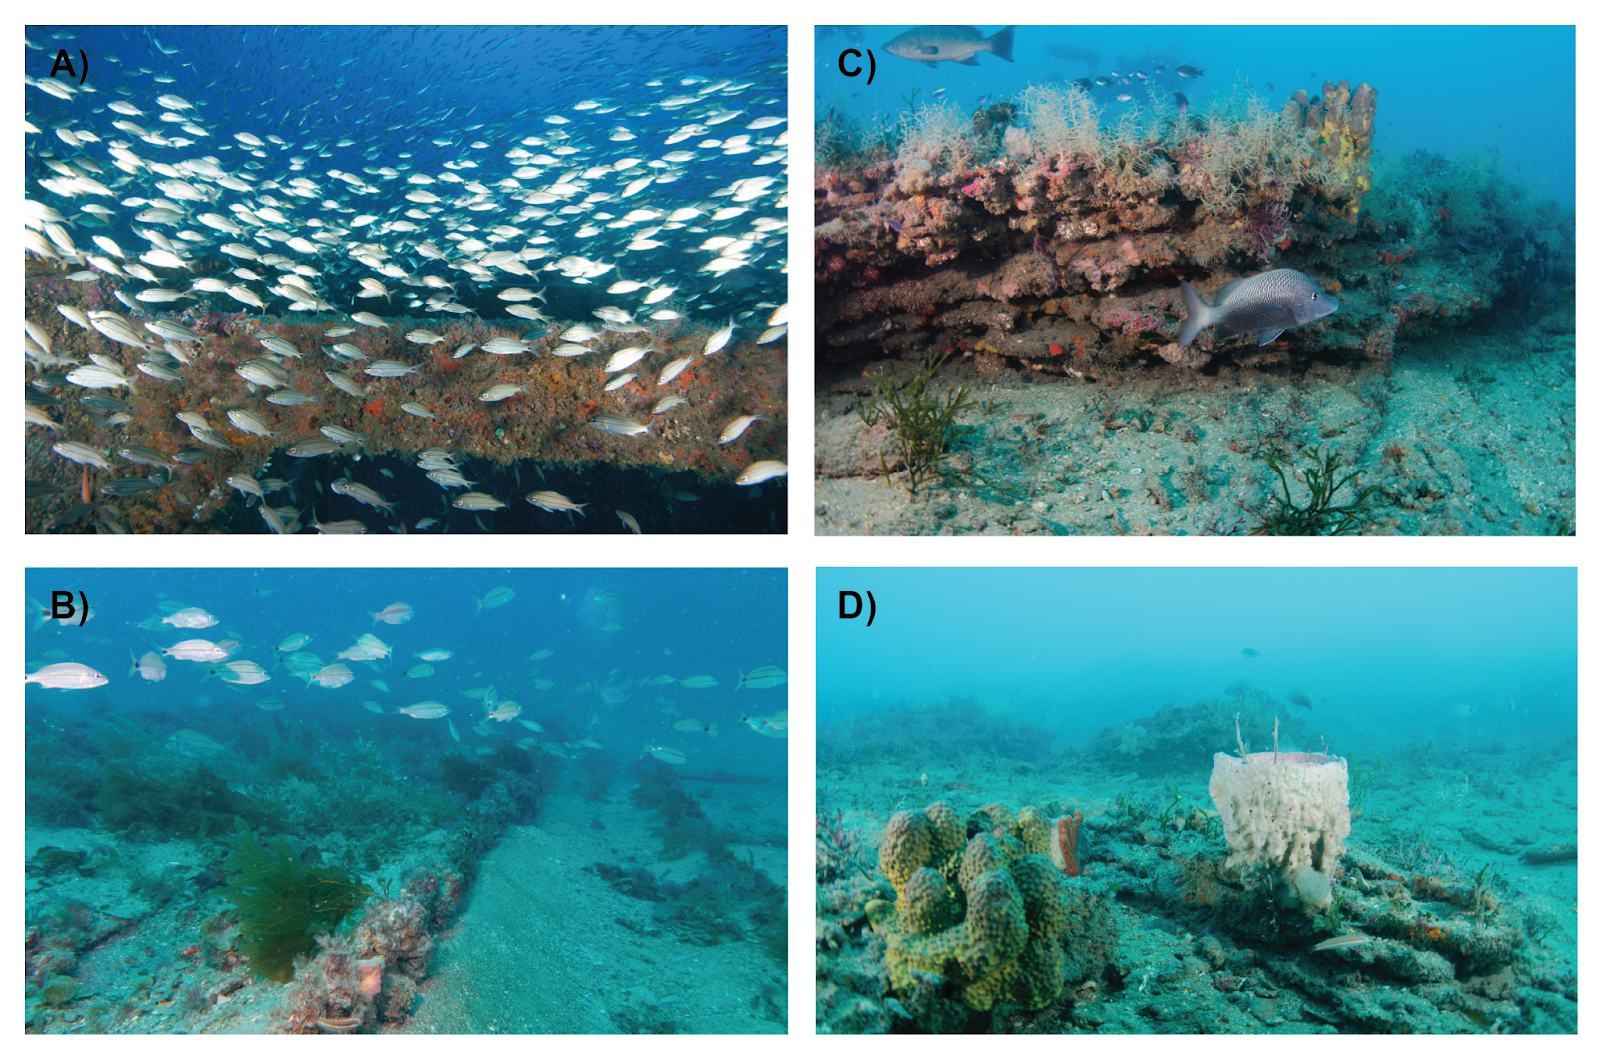 Underwater images of artificial reefs (A, B) and natural reefs (C, D) on the southeast US continental shelf. (A) Artificial reef created by a ship. (B) Artificial reef formed from a train boxcar. (C) High-relief rocky reef. (D) Low-relief rocky reef. Photos by John McCord/Coastal Studies Institute (A), Cory Ames/NCCOS (B), Dave Sybert (C, D). From Steward et al. 2022. 